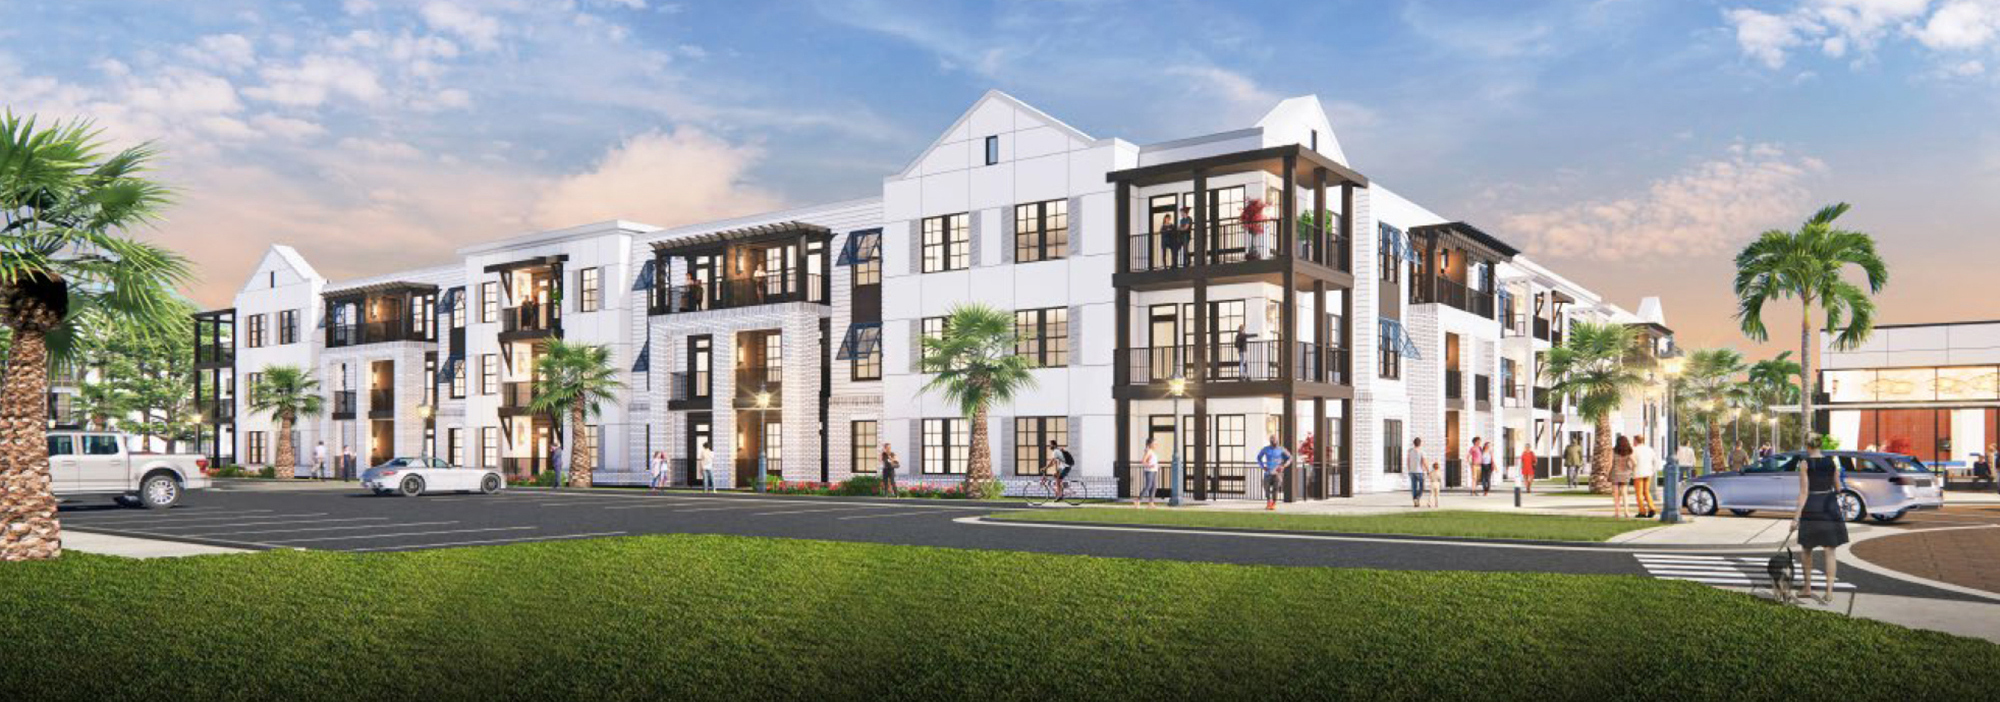 Apartments are planned for the Adventure Landing property in Jacksonville Beach.